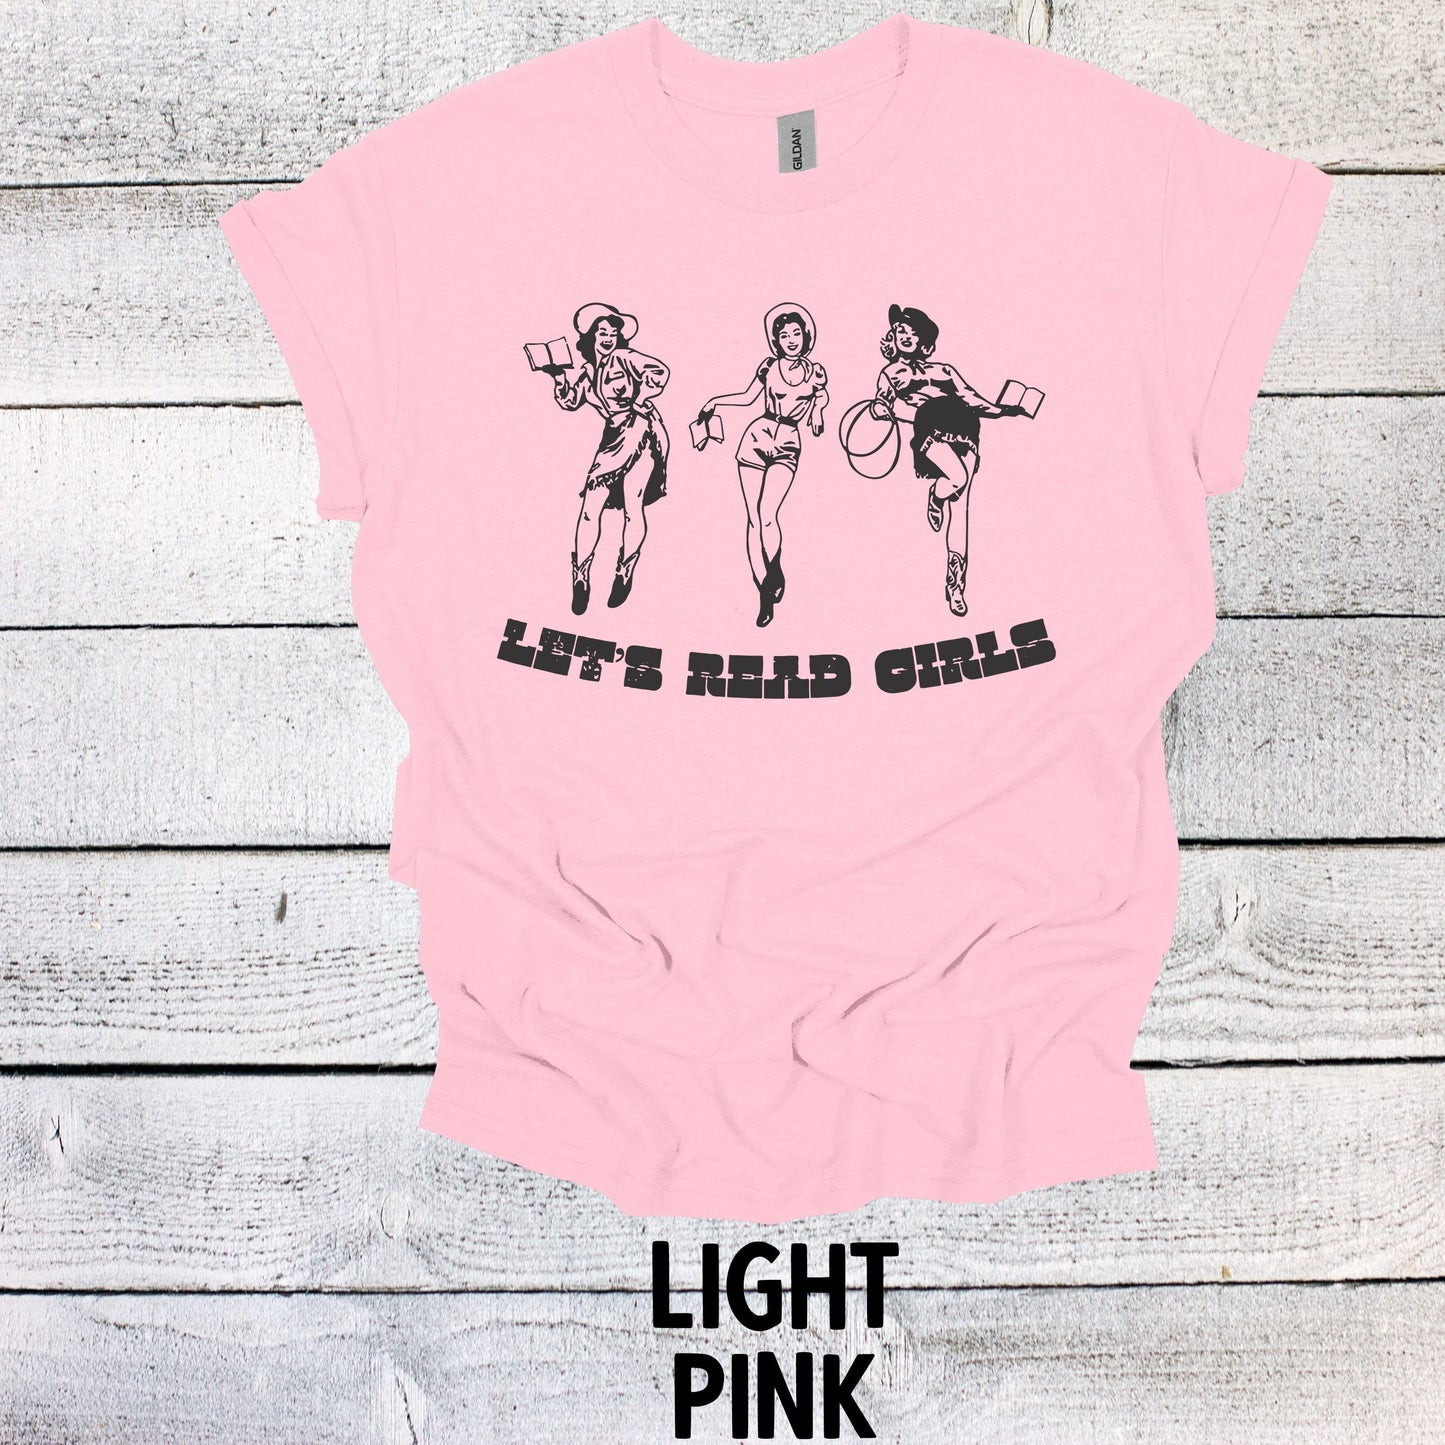 Let's Read Girls Book Shirt- Cowgirl Western Book Shirt